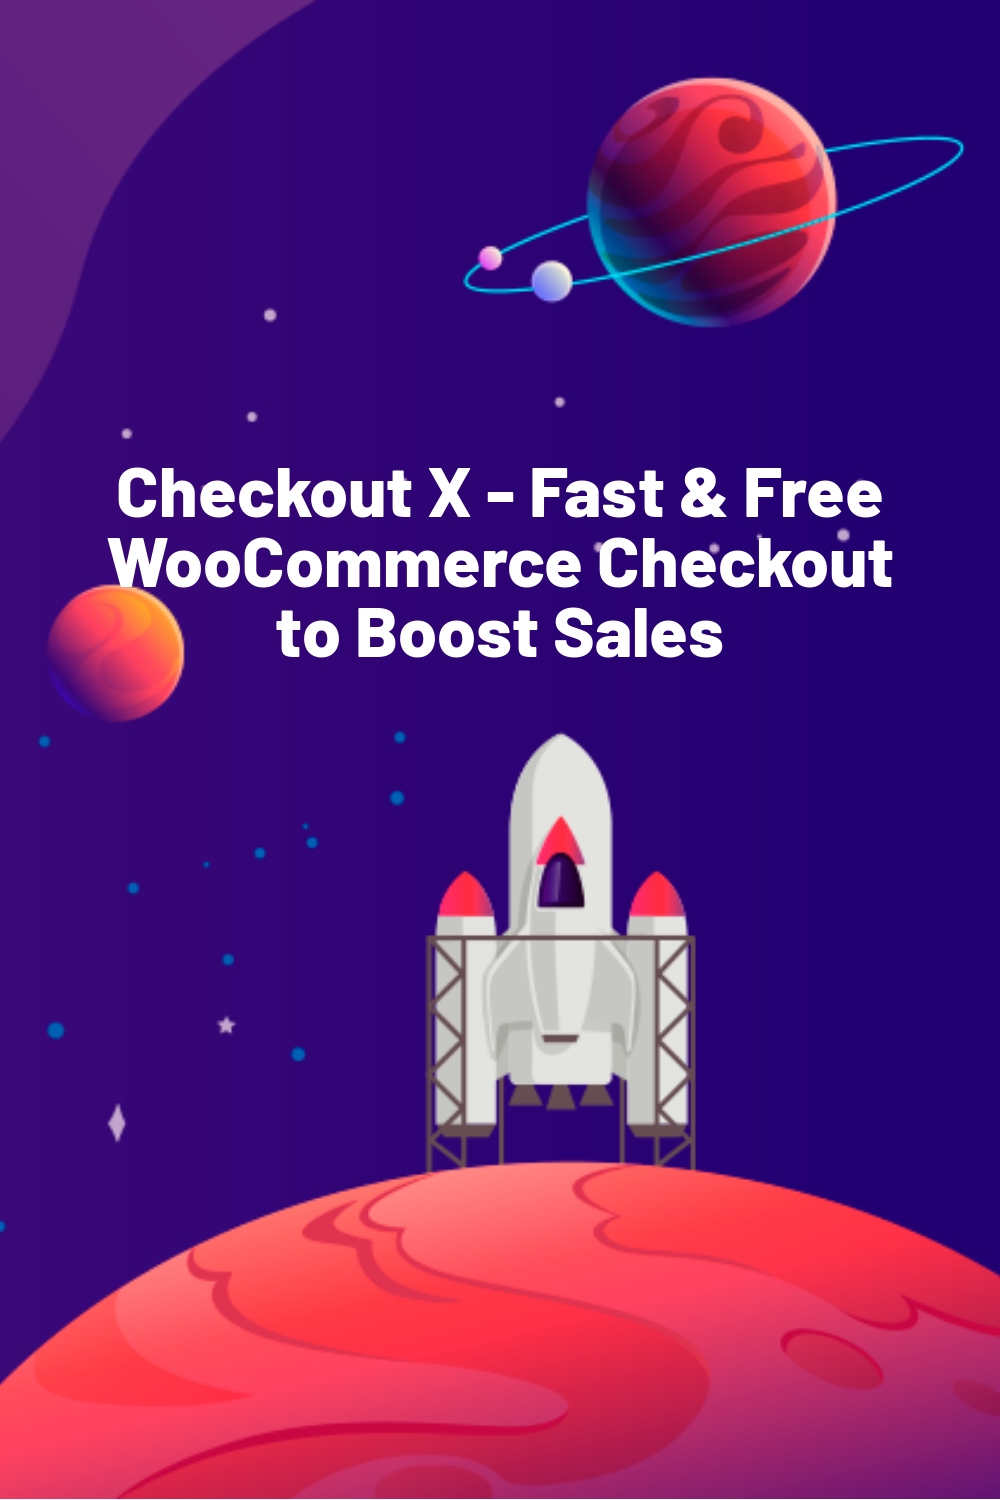 Checkout X – Fast & Free WooCommerce Checkout to Boost Sales